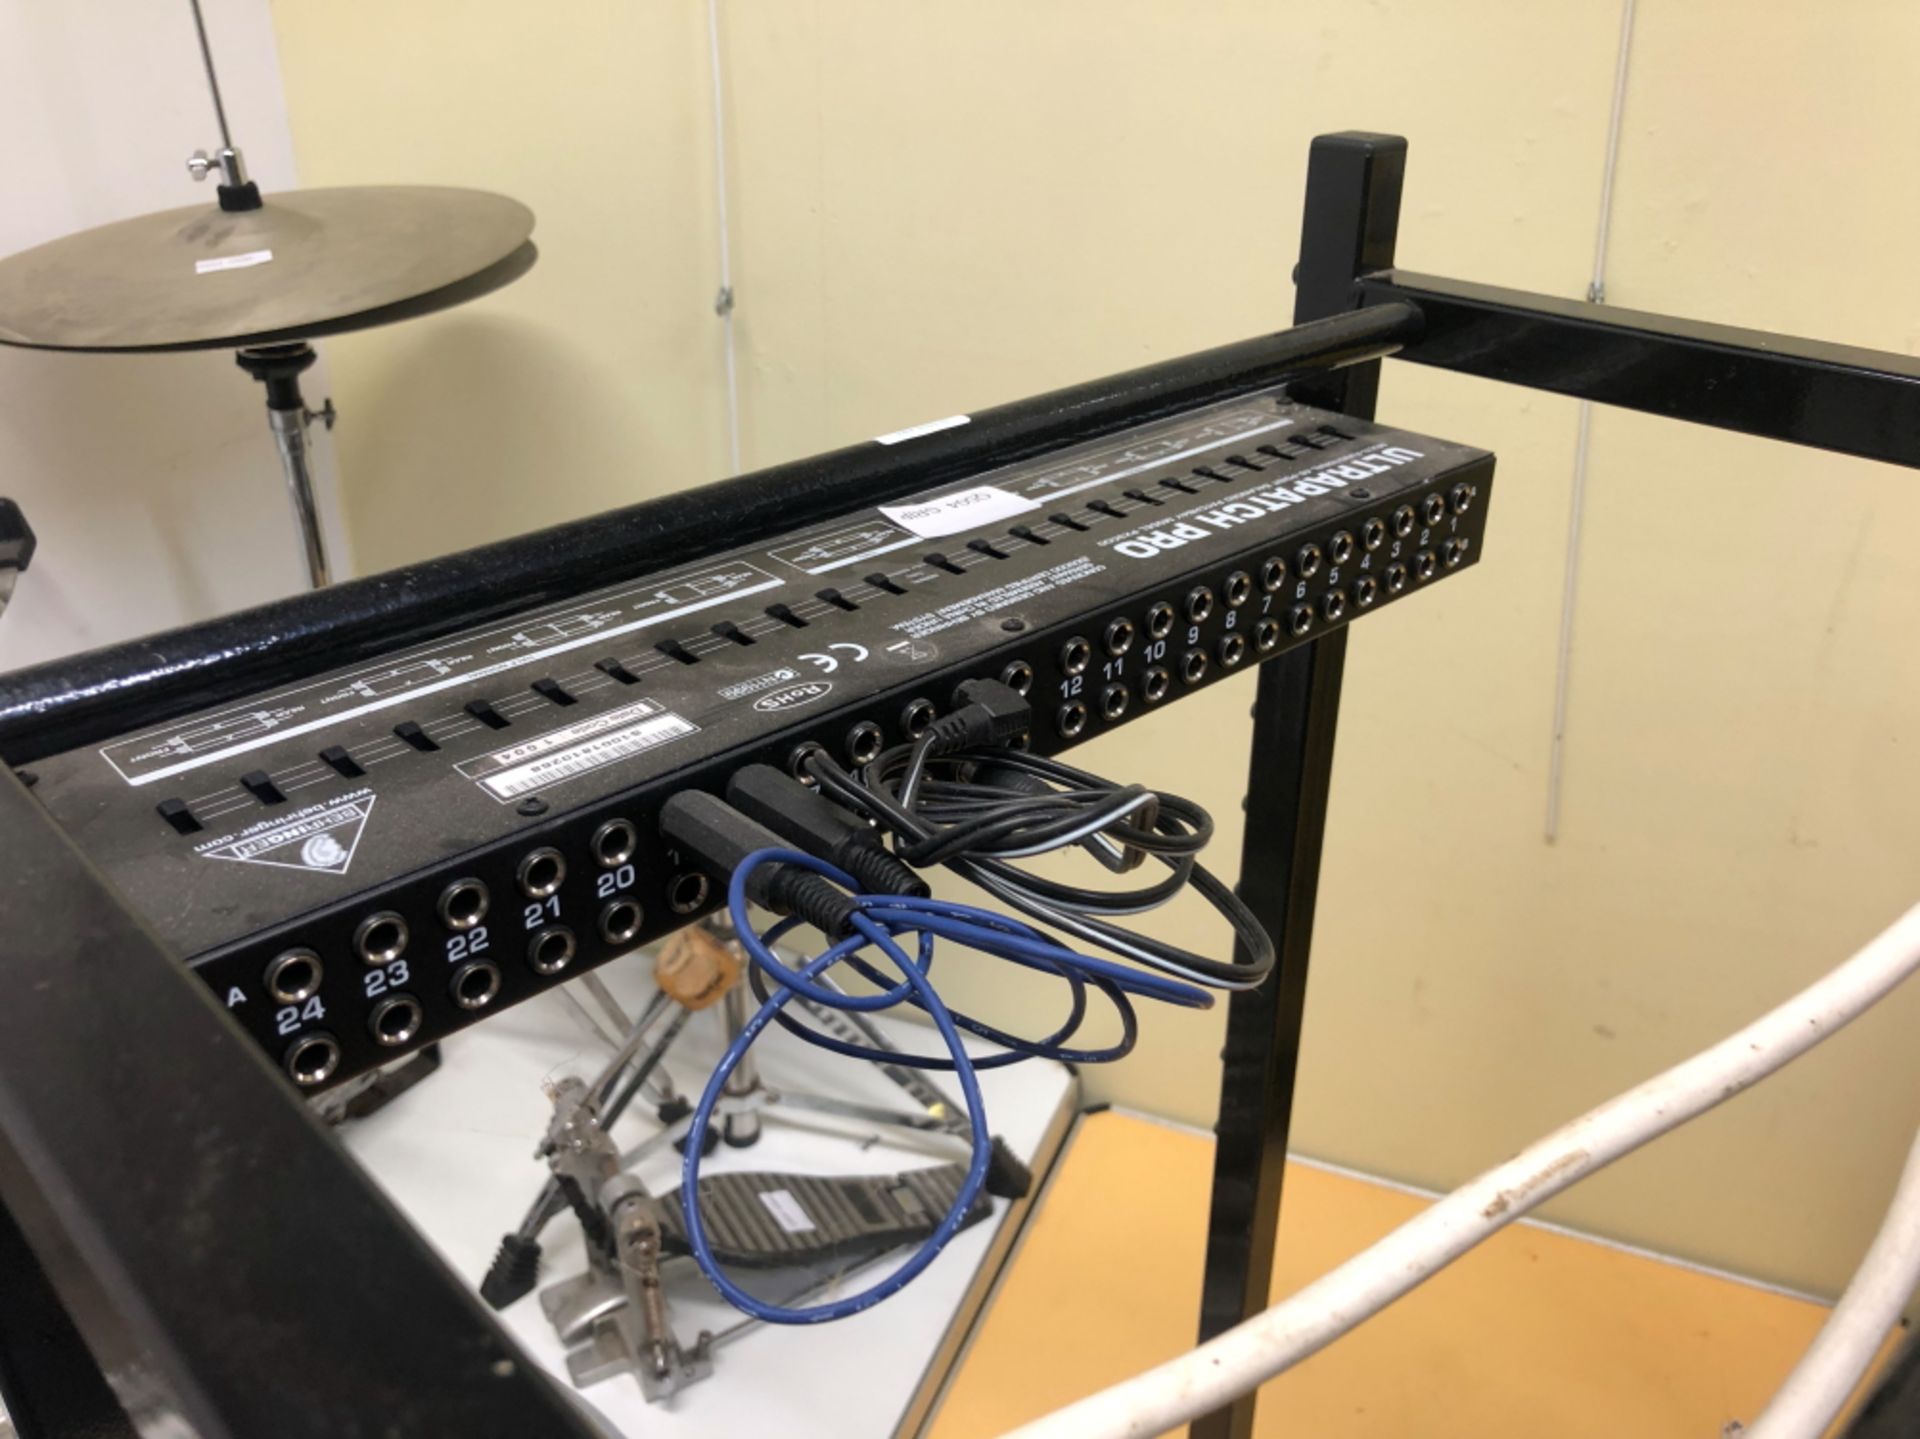 RACK MOUNT/STAND WITH BEHRINGER - ULTRA PATCH PRO 48 POINT PATCHBAY 51 x x 91 x 38 cms, MODEL - Image 8 of 8